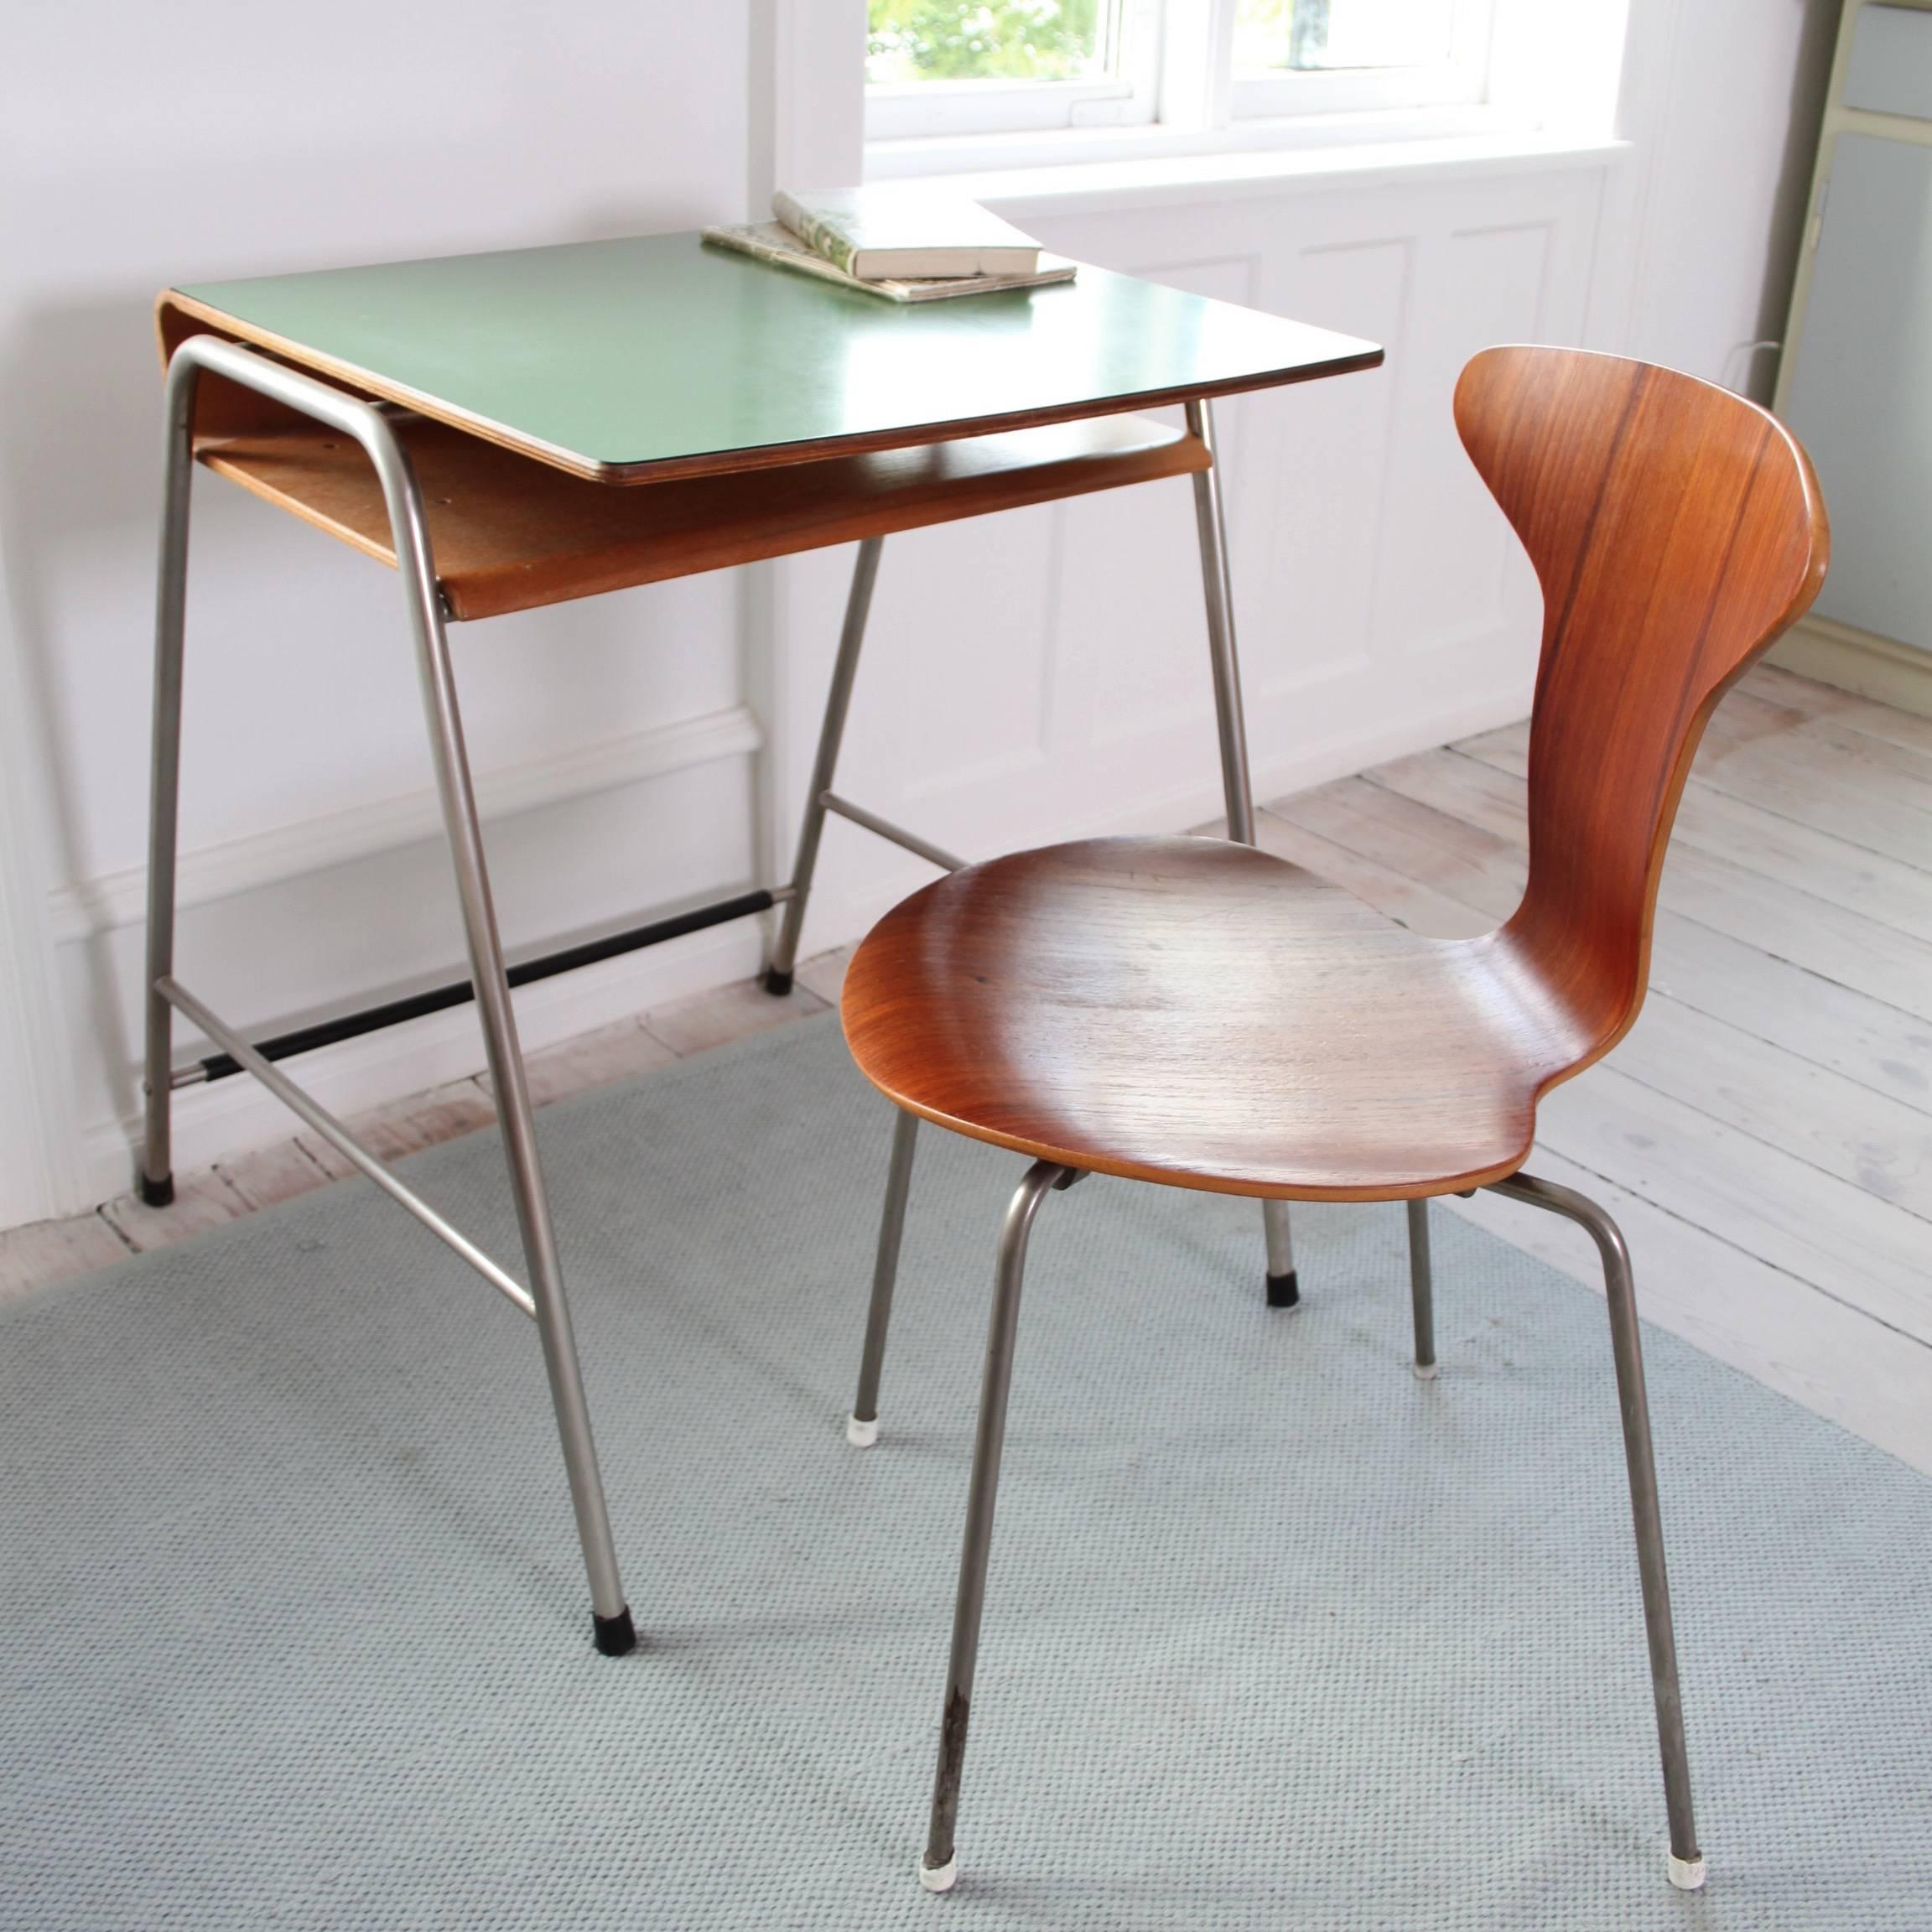 ARNE JACOBSEN AND FRITZ HANSEN - SCANDINAVIAN MODERN

This is the original scool desk and chair, designed by Arne Jacobsen for the Munkegaard School in Vangede, Denmark in 1955. 

The materials are form-moulded teak and laminated top with a tubular